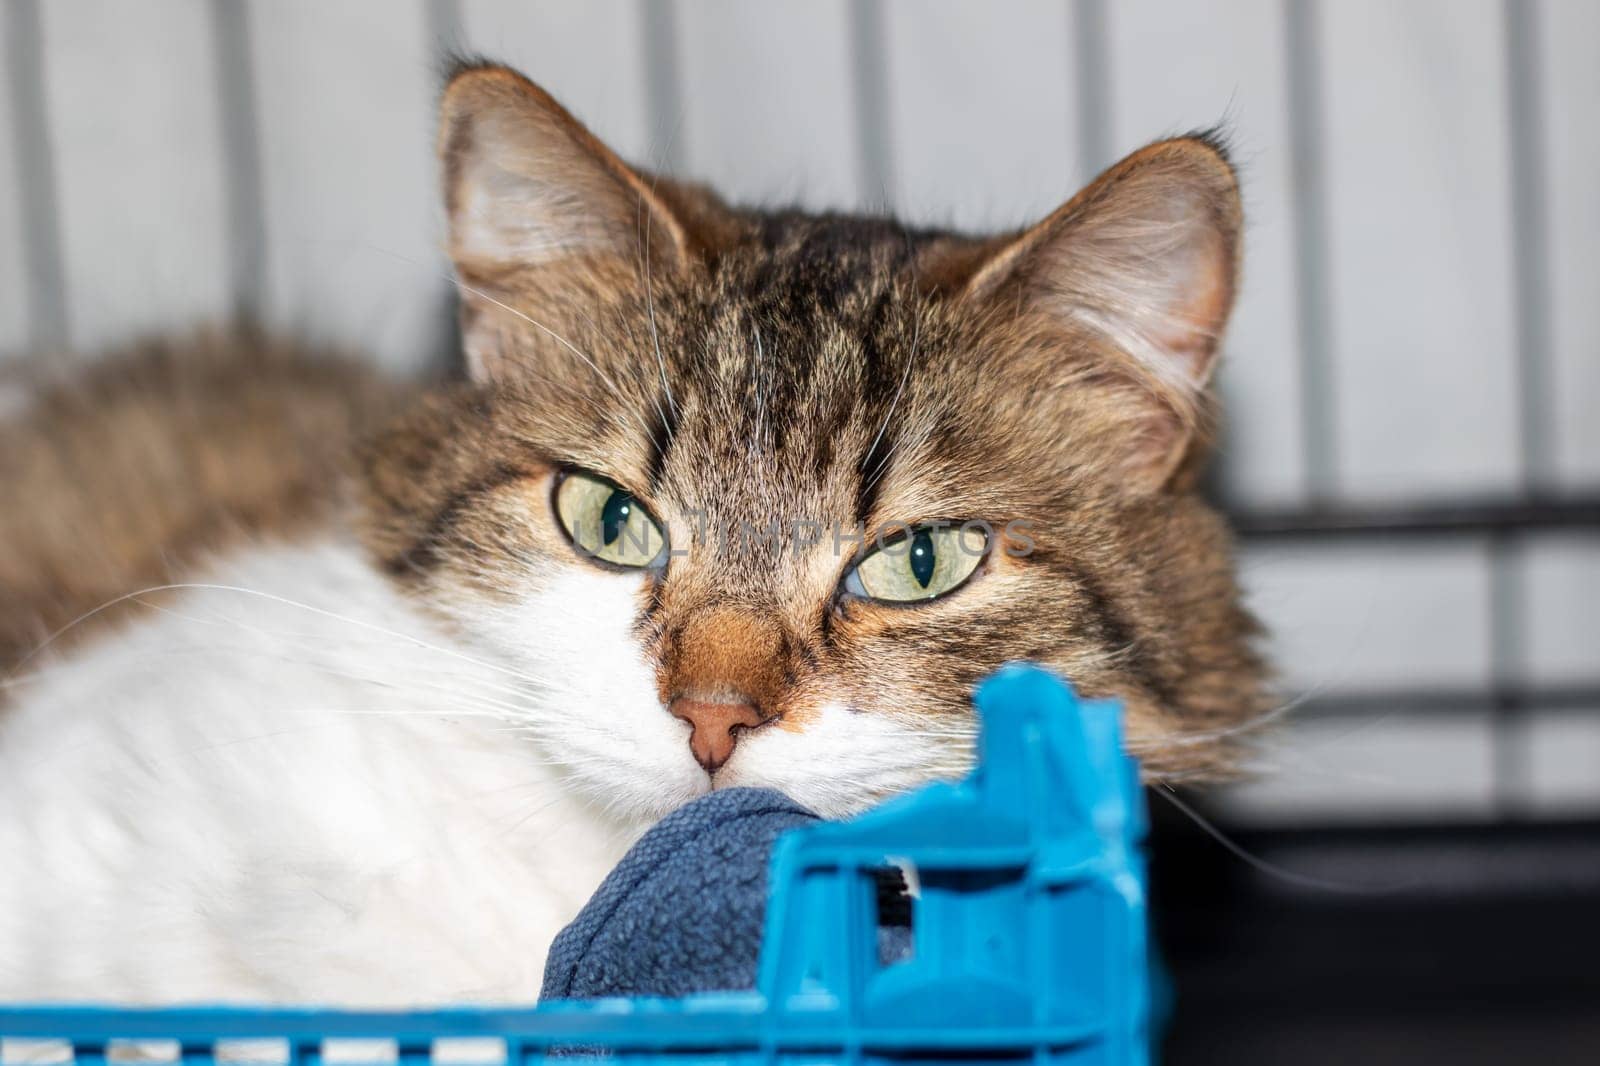 In the image, a cat is comfortably resting inside a blue crate and curiously gazing towards the camera lens